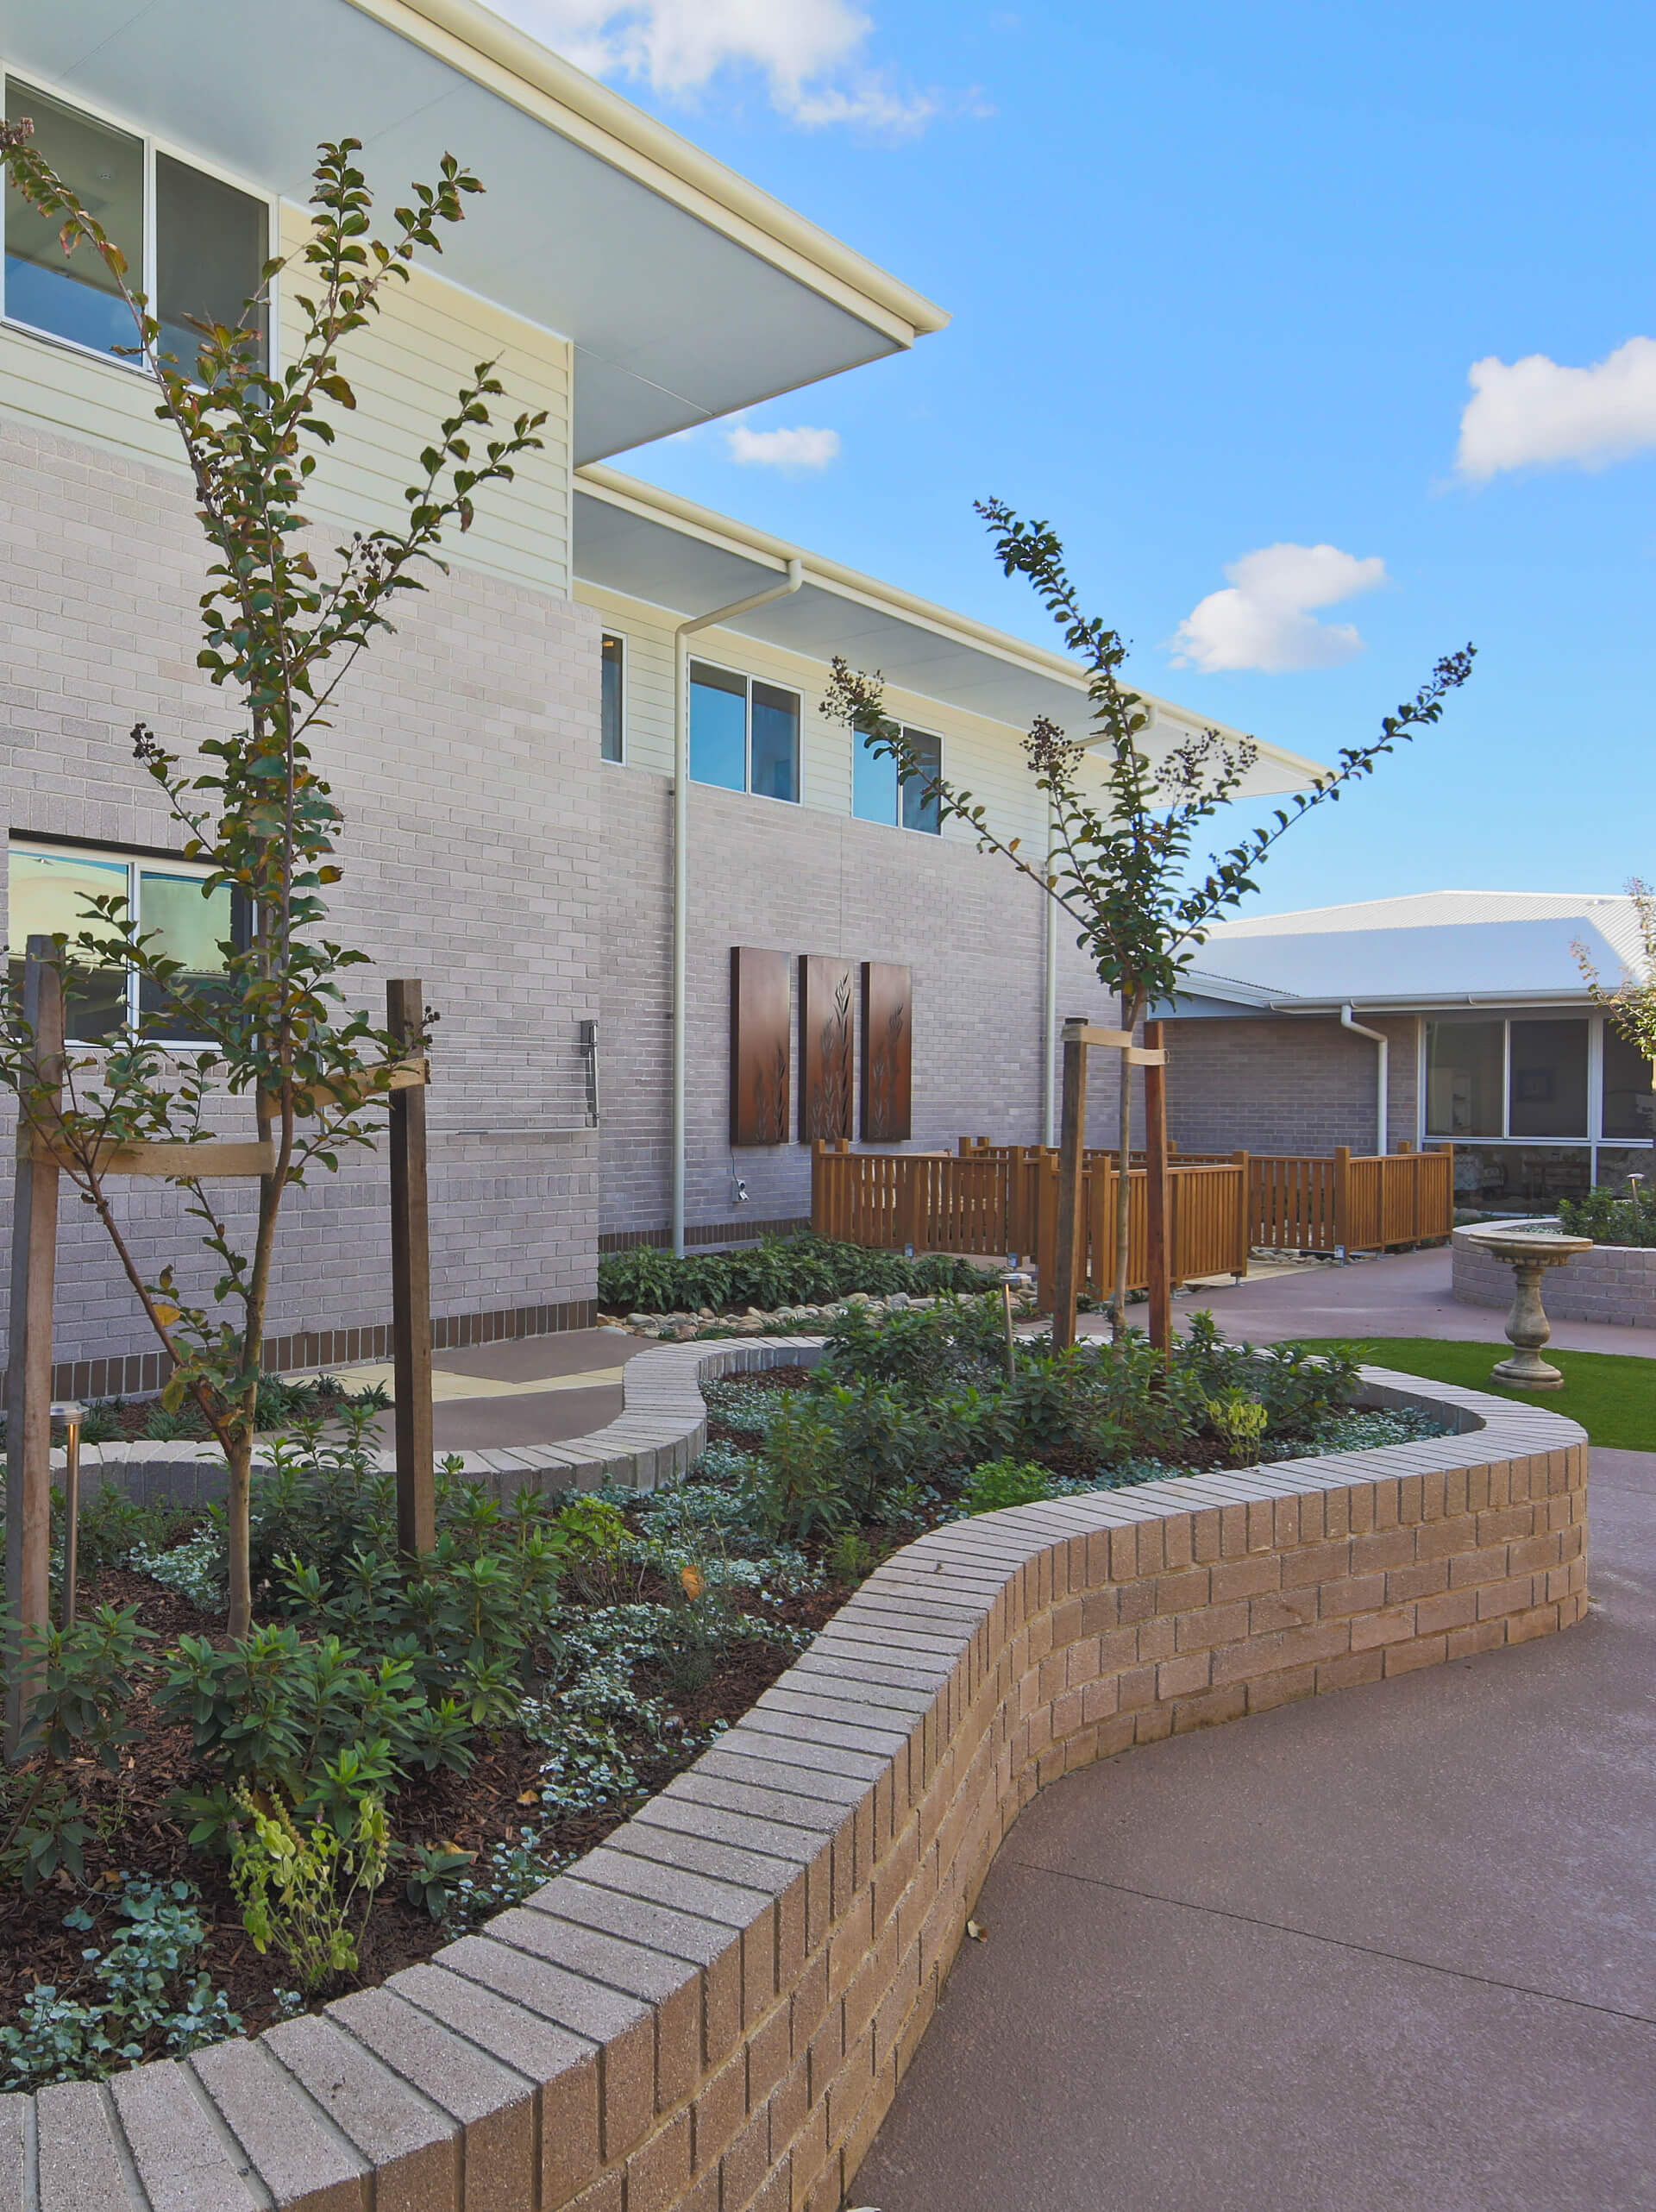 6 alternate view landscaped courtyard bupa bankstown taylor construction health and aged care